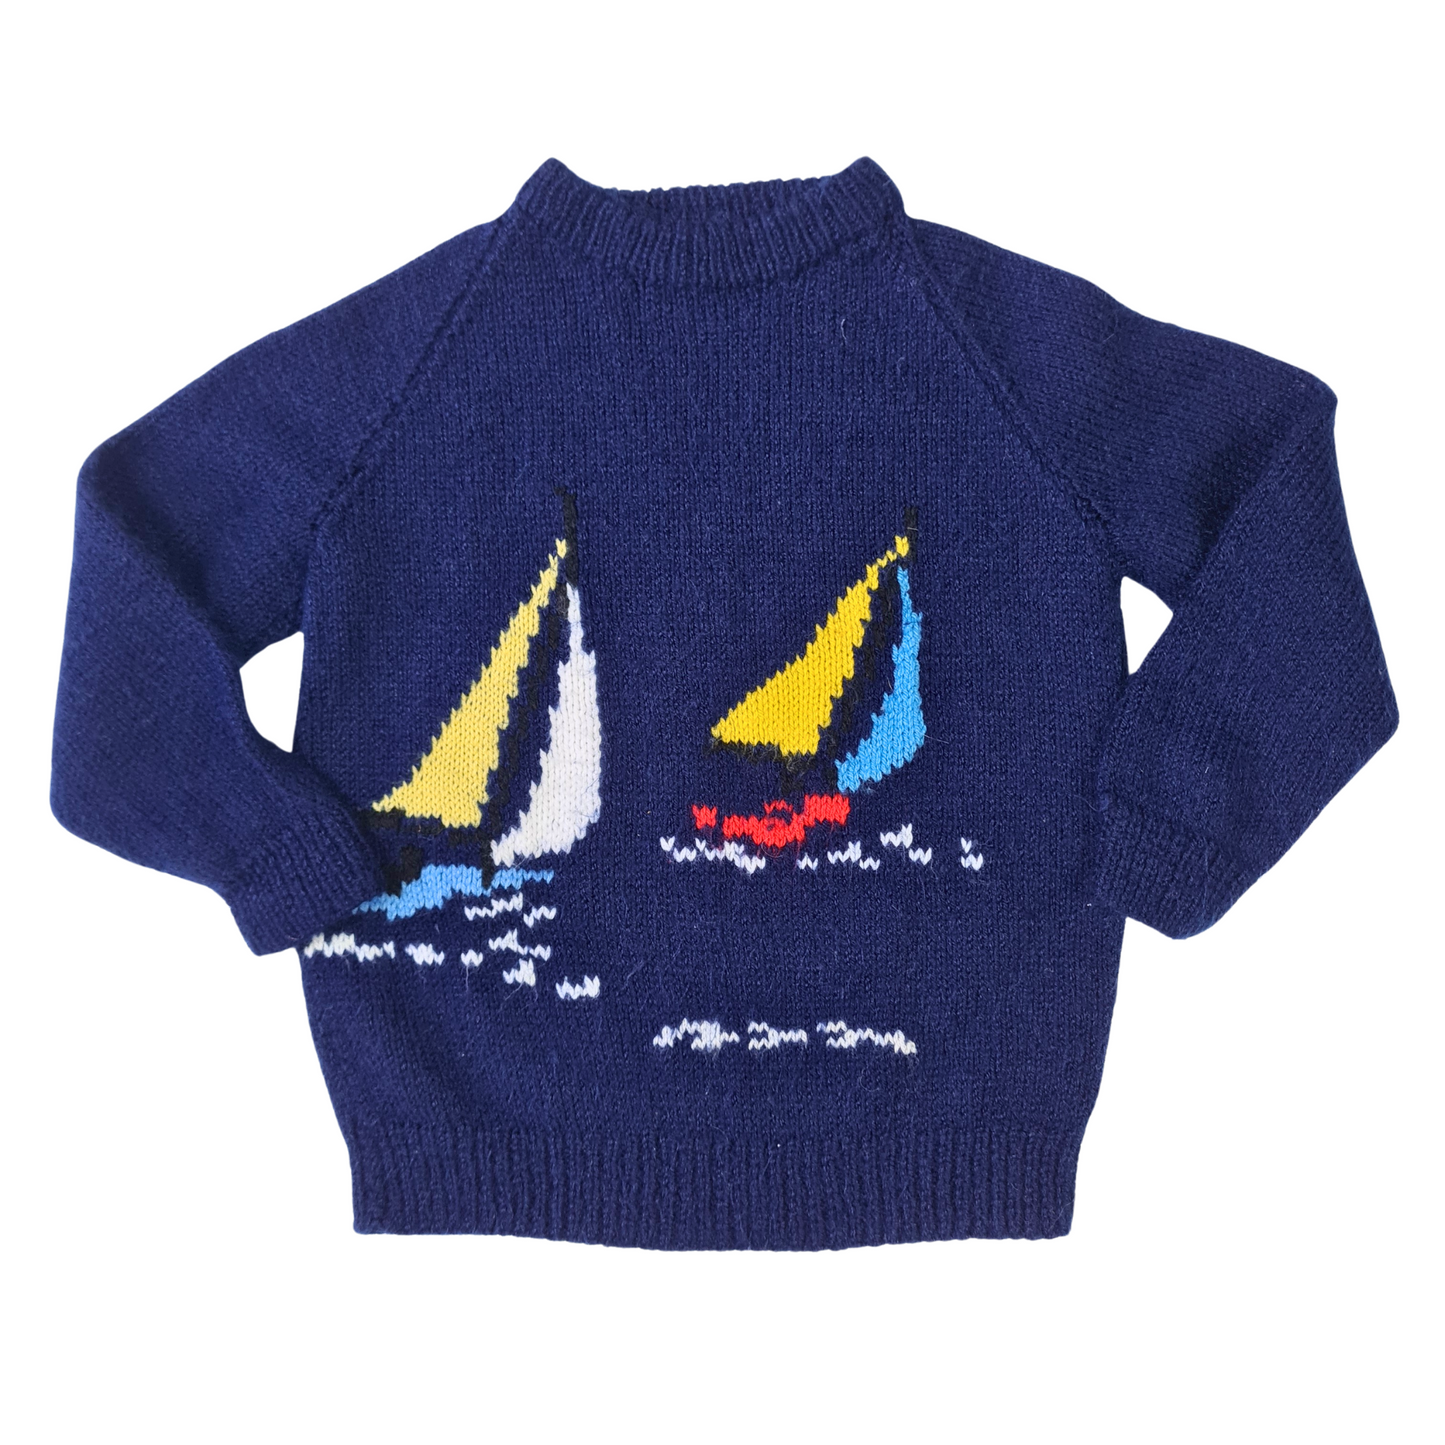 Sailboat Knitted Jumper